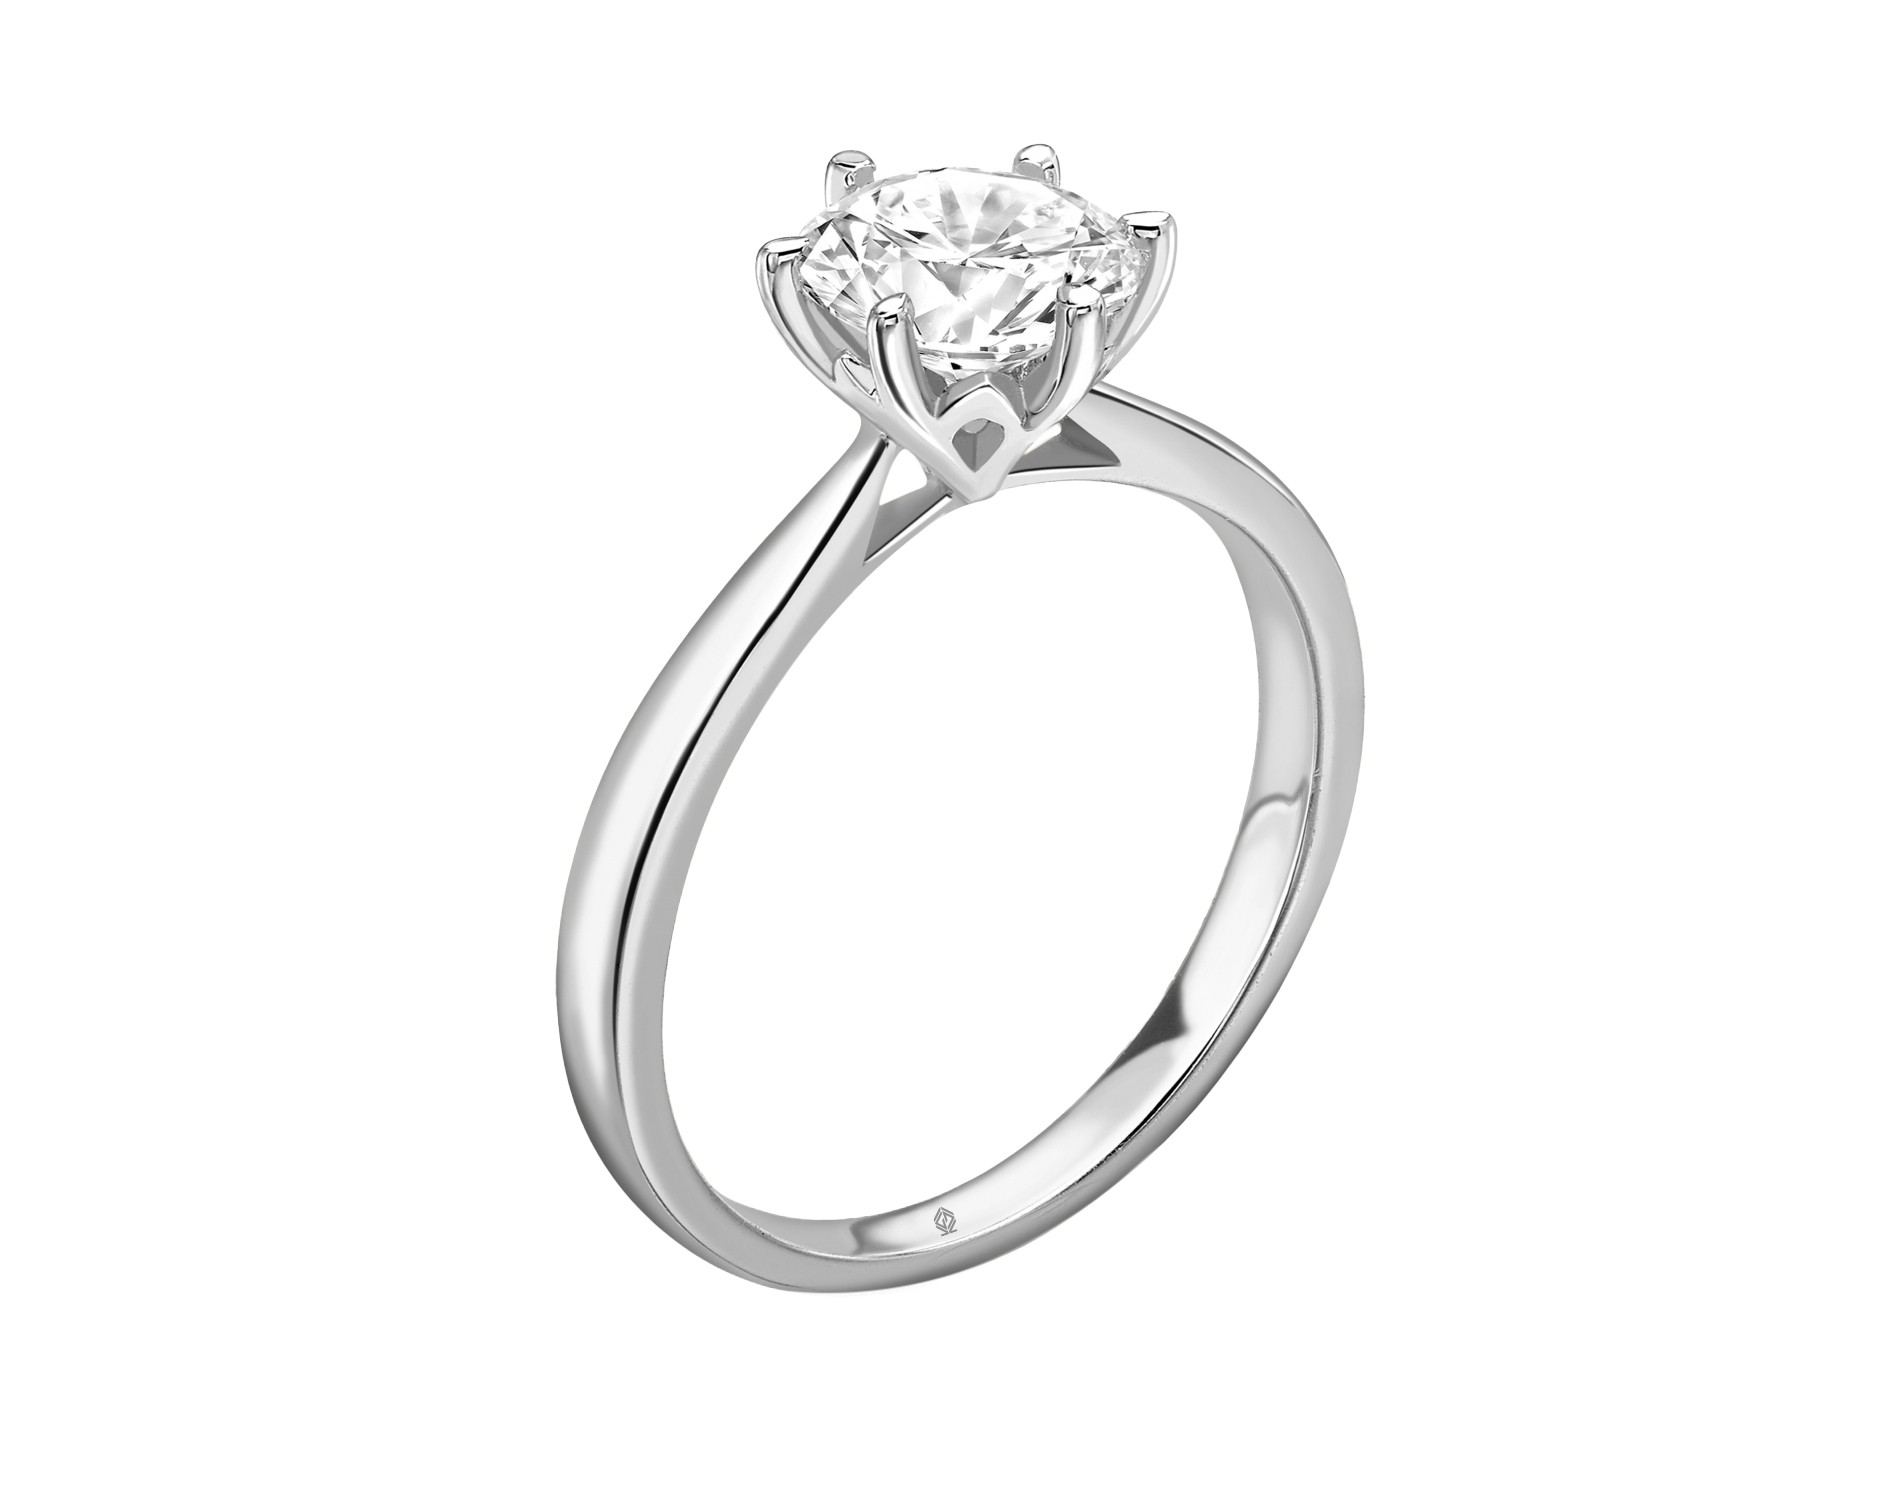 18K WHITE GOLD 6 PRONGS HEAD SOLITAIRE ROUND CUT DIAMOND ENGAGEMENT RING